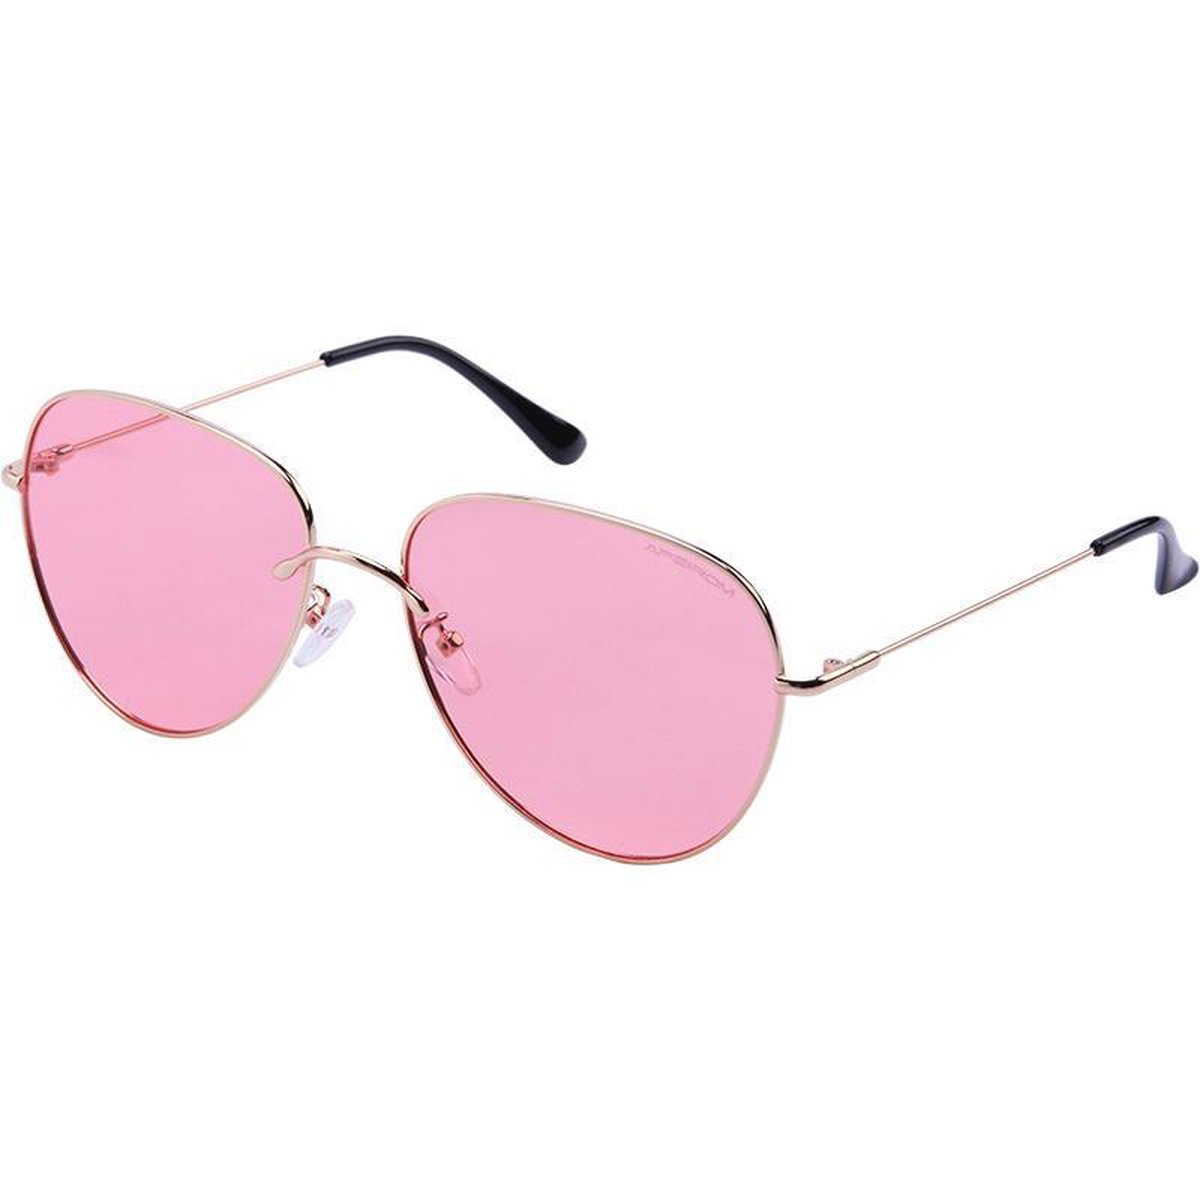 Nihao Todos HD 1.1mm Polarized lens - Gold Plated Metal Anti-Allergisch Frame - Roze base Lens - Beweegbare neusvleugels - UV400